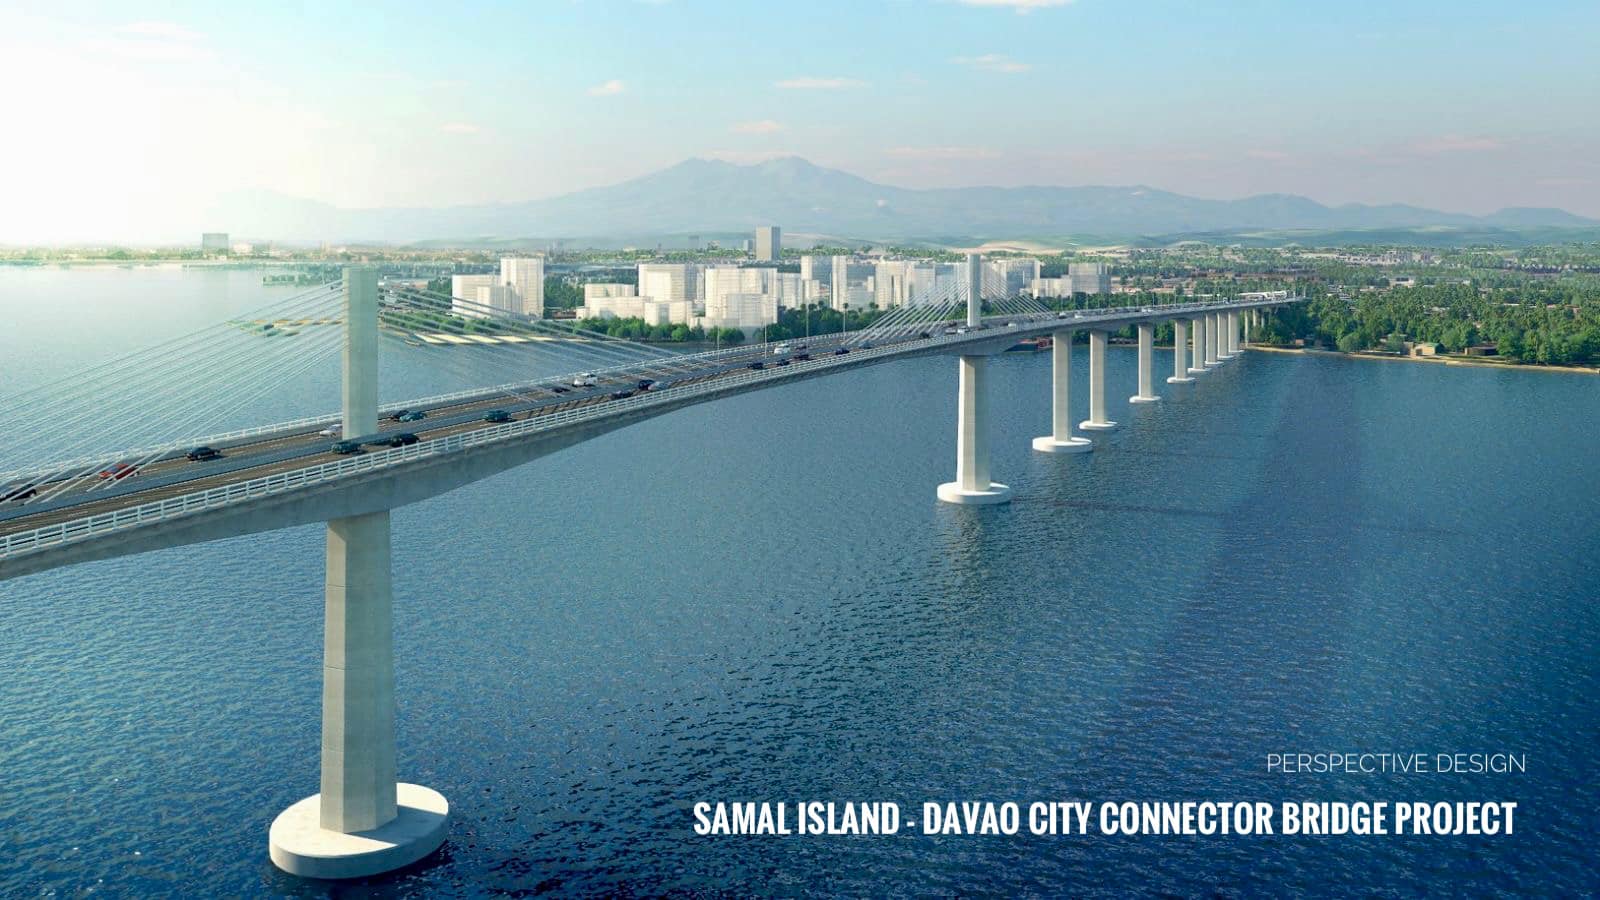 China loans 90% of total project cost for Samal Island-Davao City Connector Bridge (SIDC)